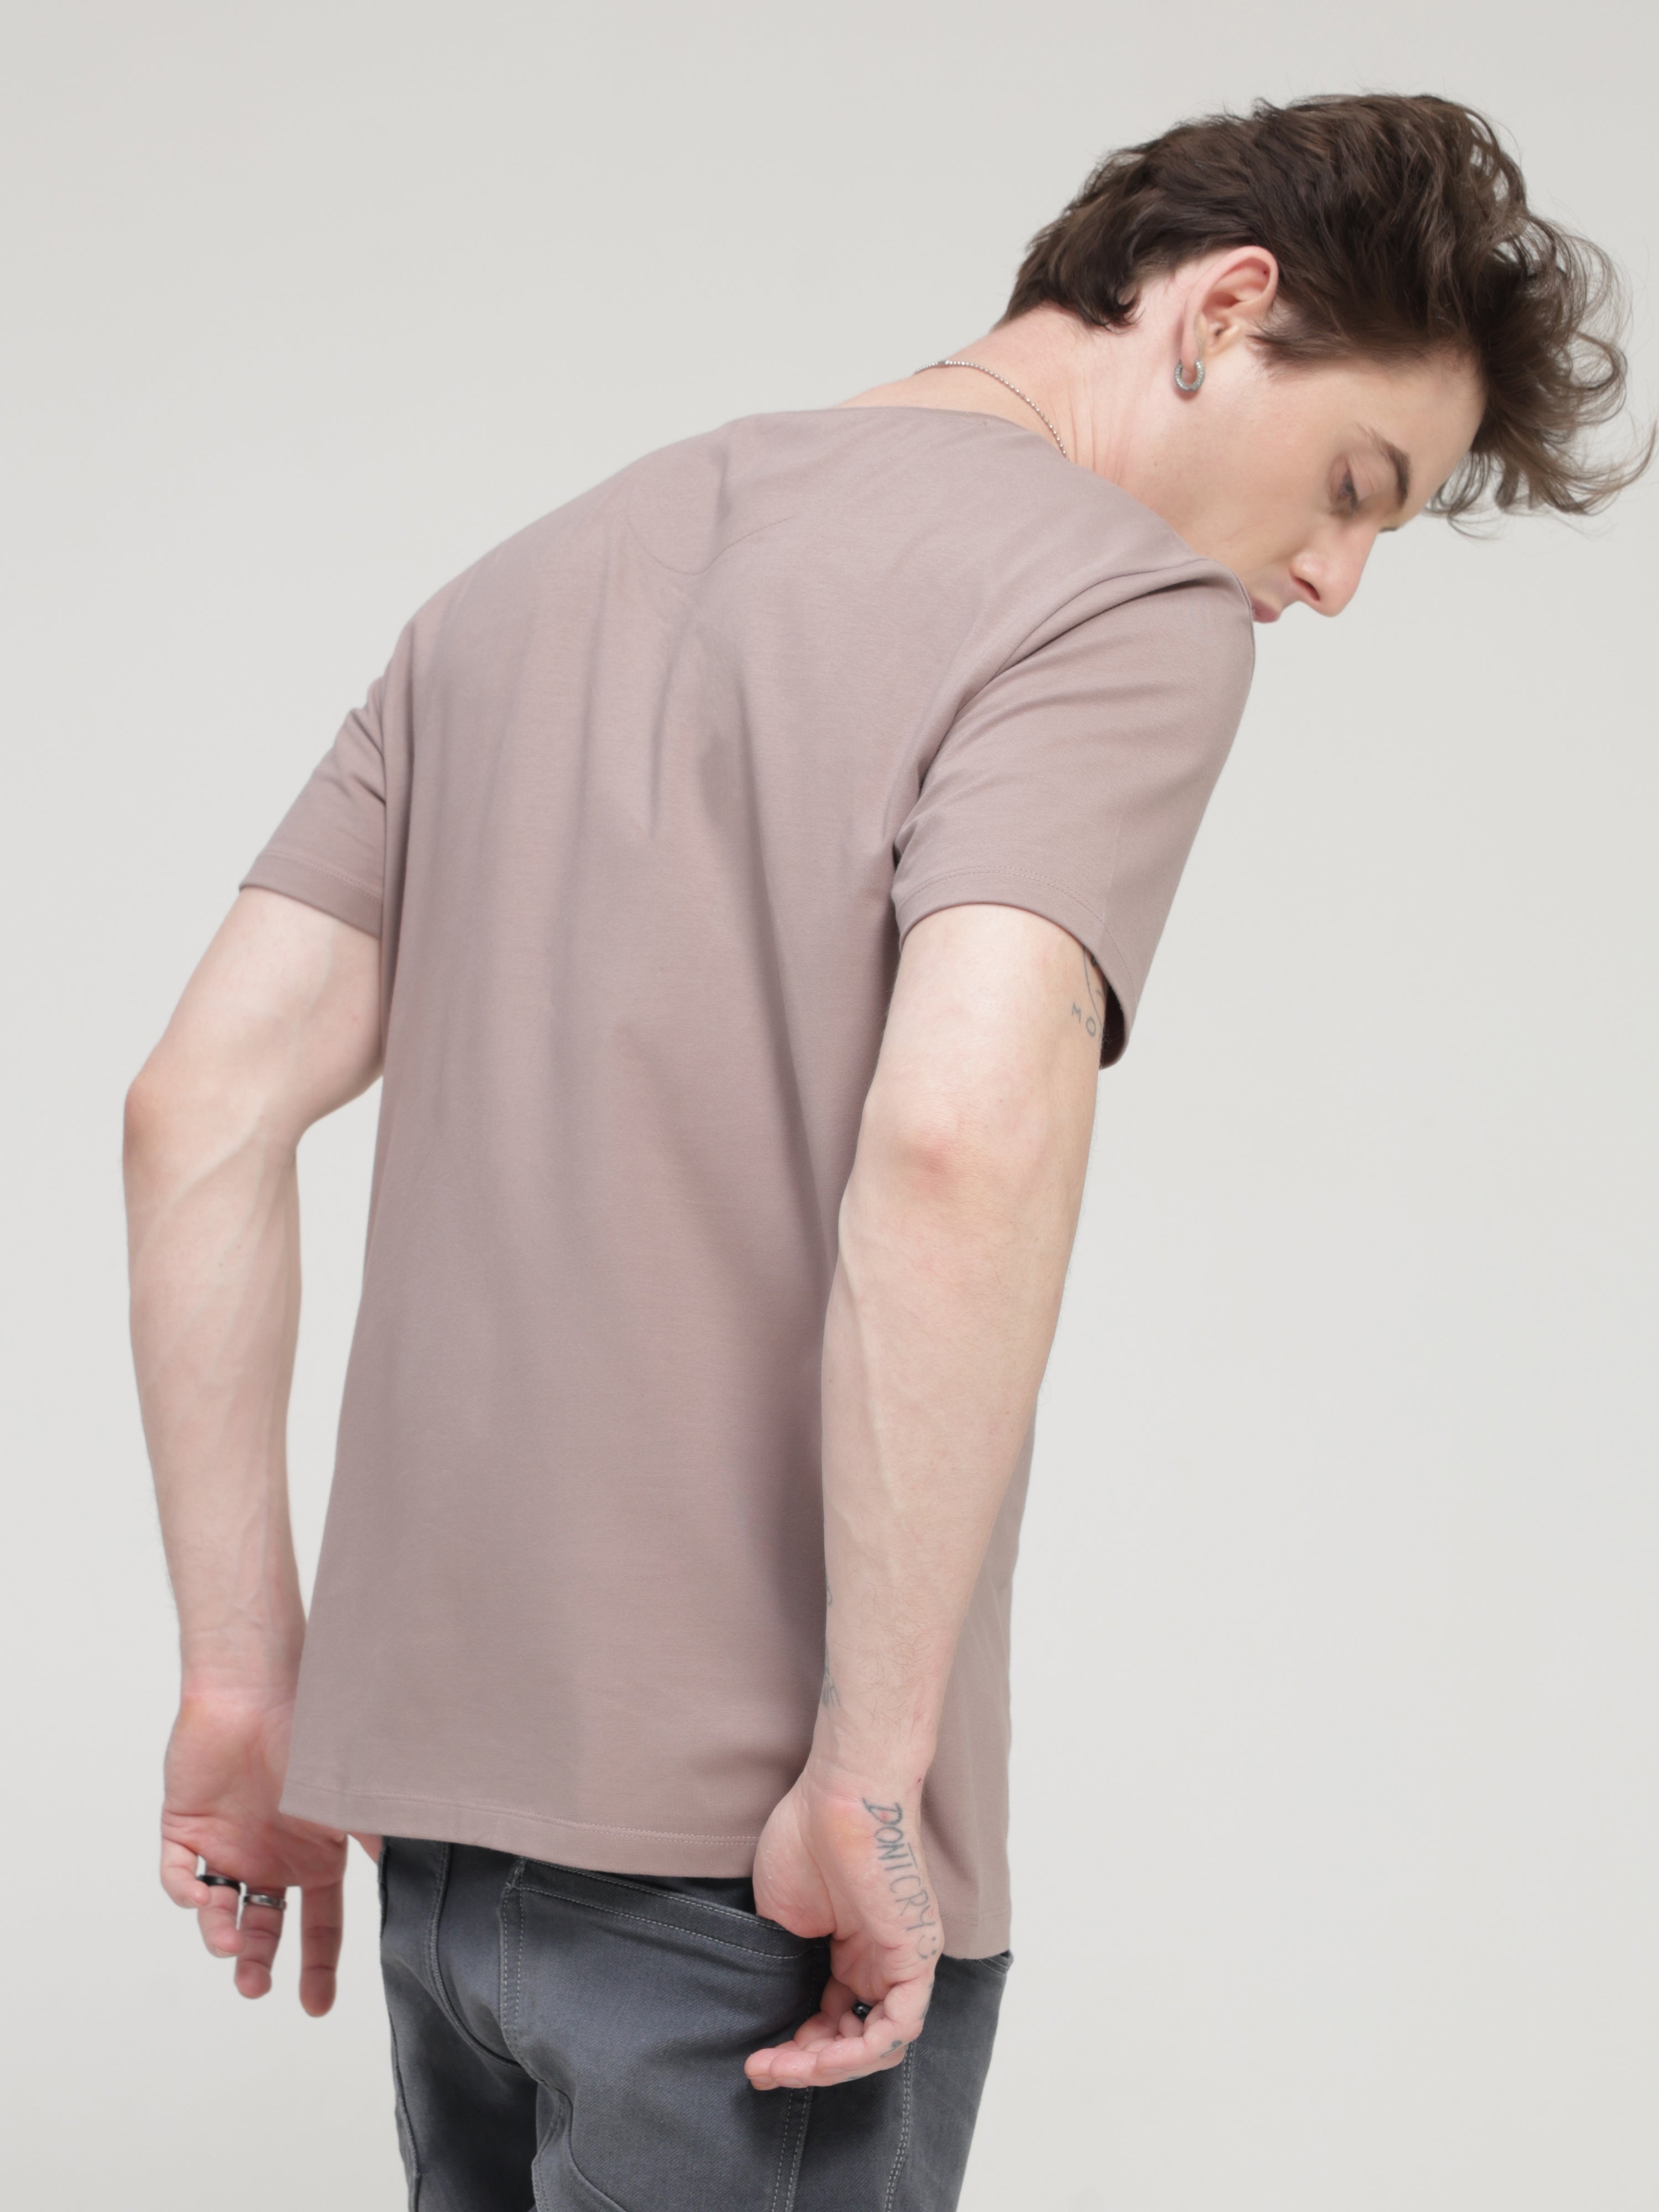 Man wearing Dusky Maroon round-neck Turms T-shirt, stain-proof and odor-resistant, tailored fit, 95% cotton, 5% spandex, stylish and trendy.